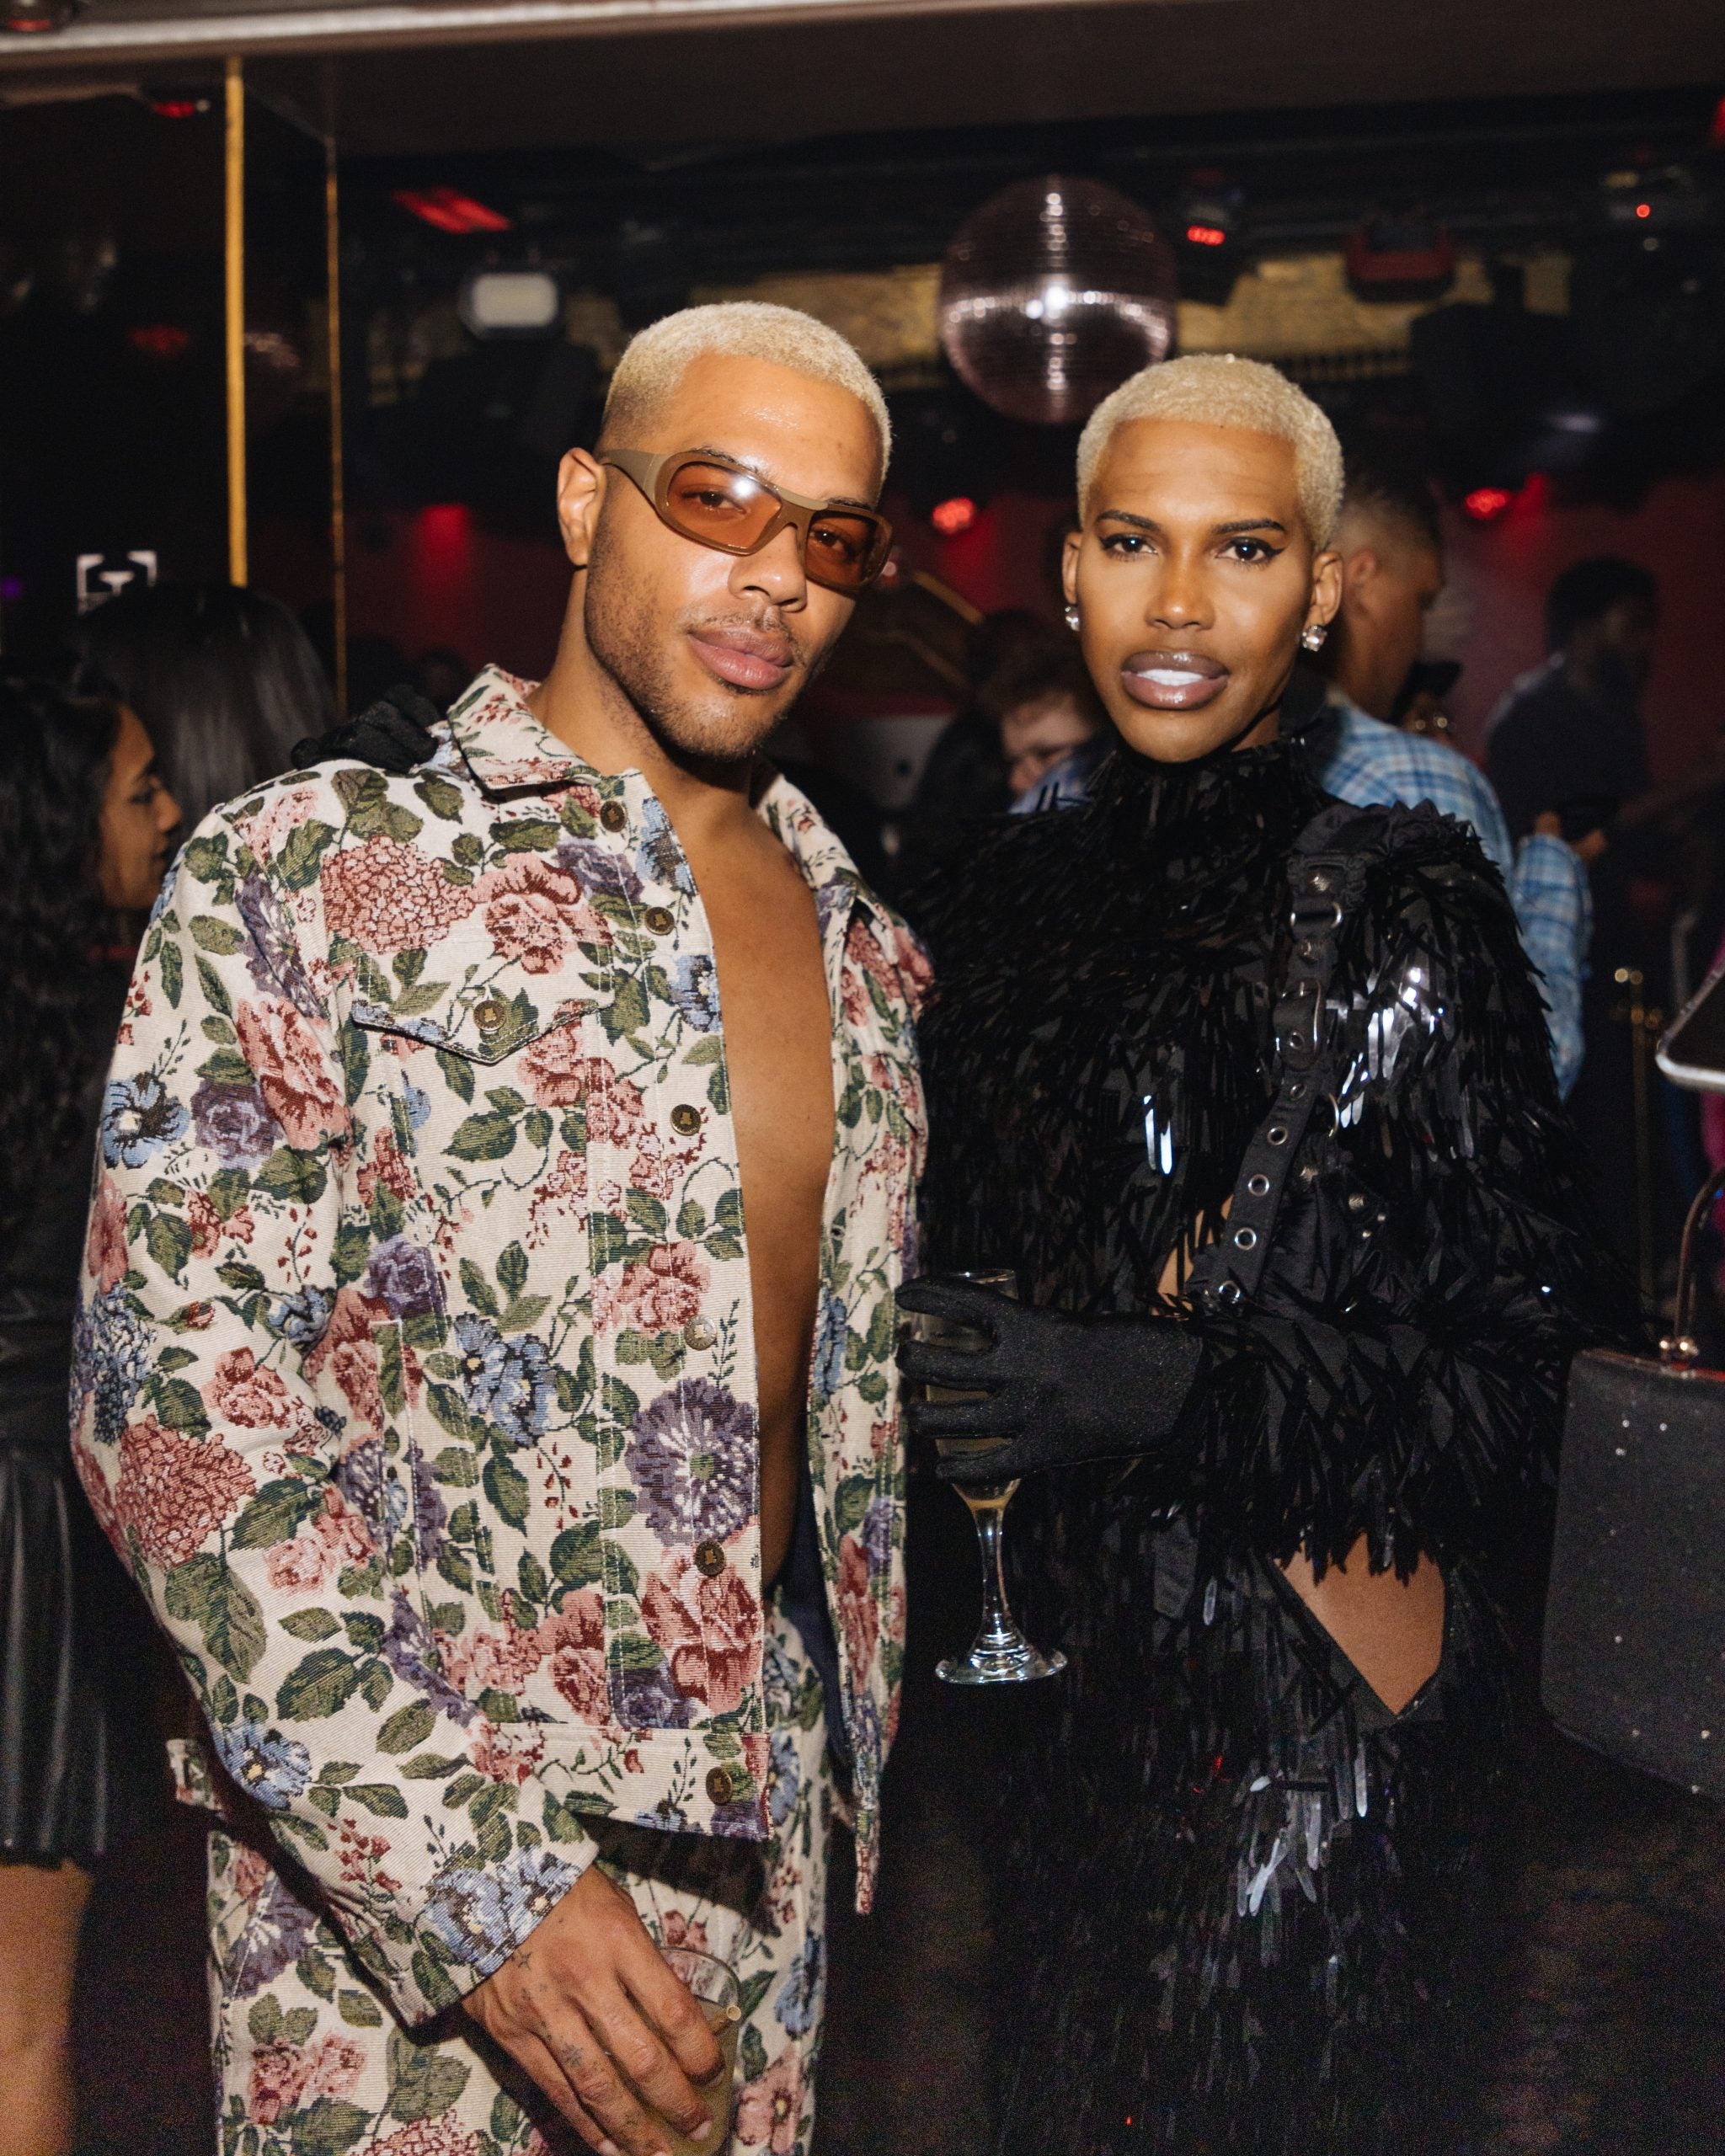 A look at the Sir John Met Gala after-party